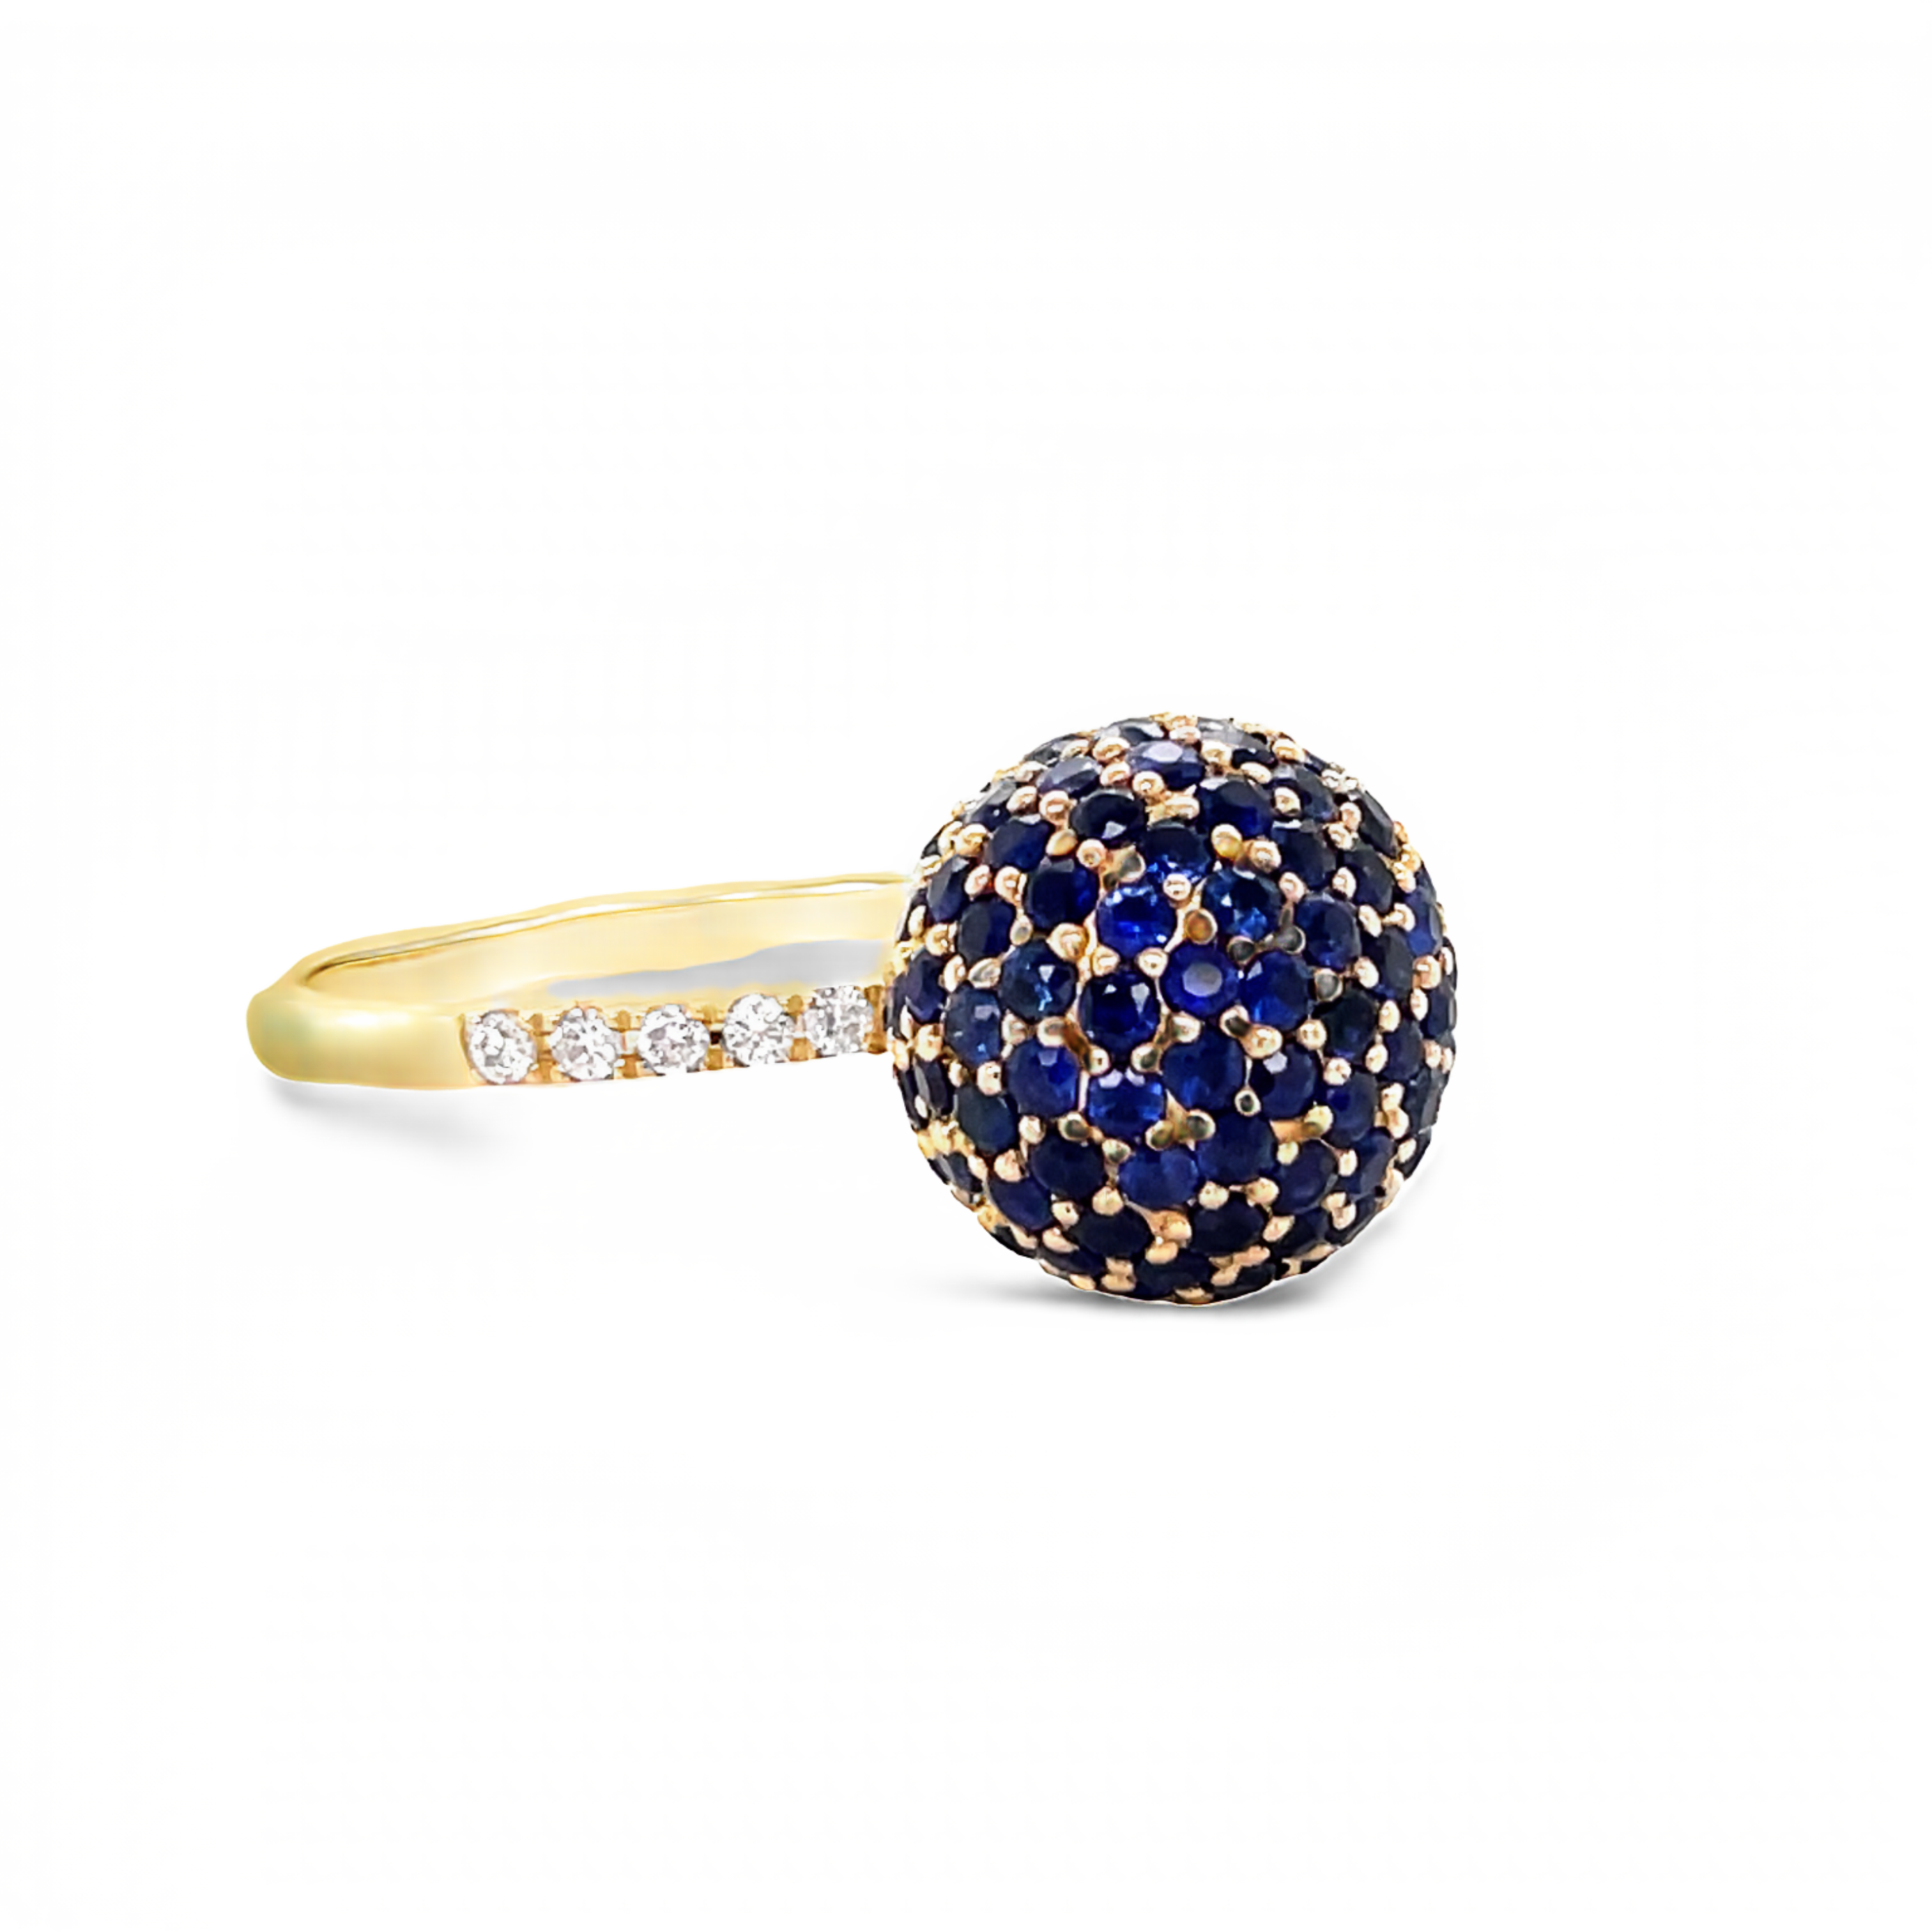 14k yellow gold  7.0 size (sizable)  Round sapphires 1.92 cts    11.00 mm  Diamonds in shank  Stackable rings 